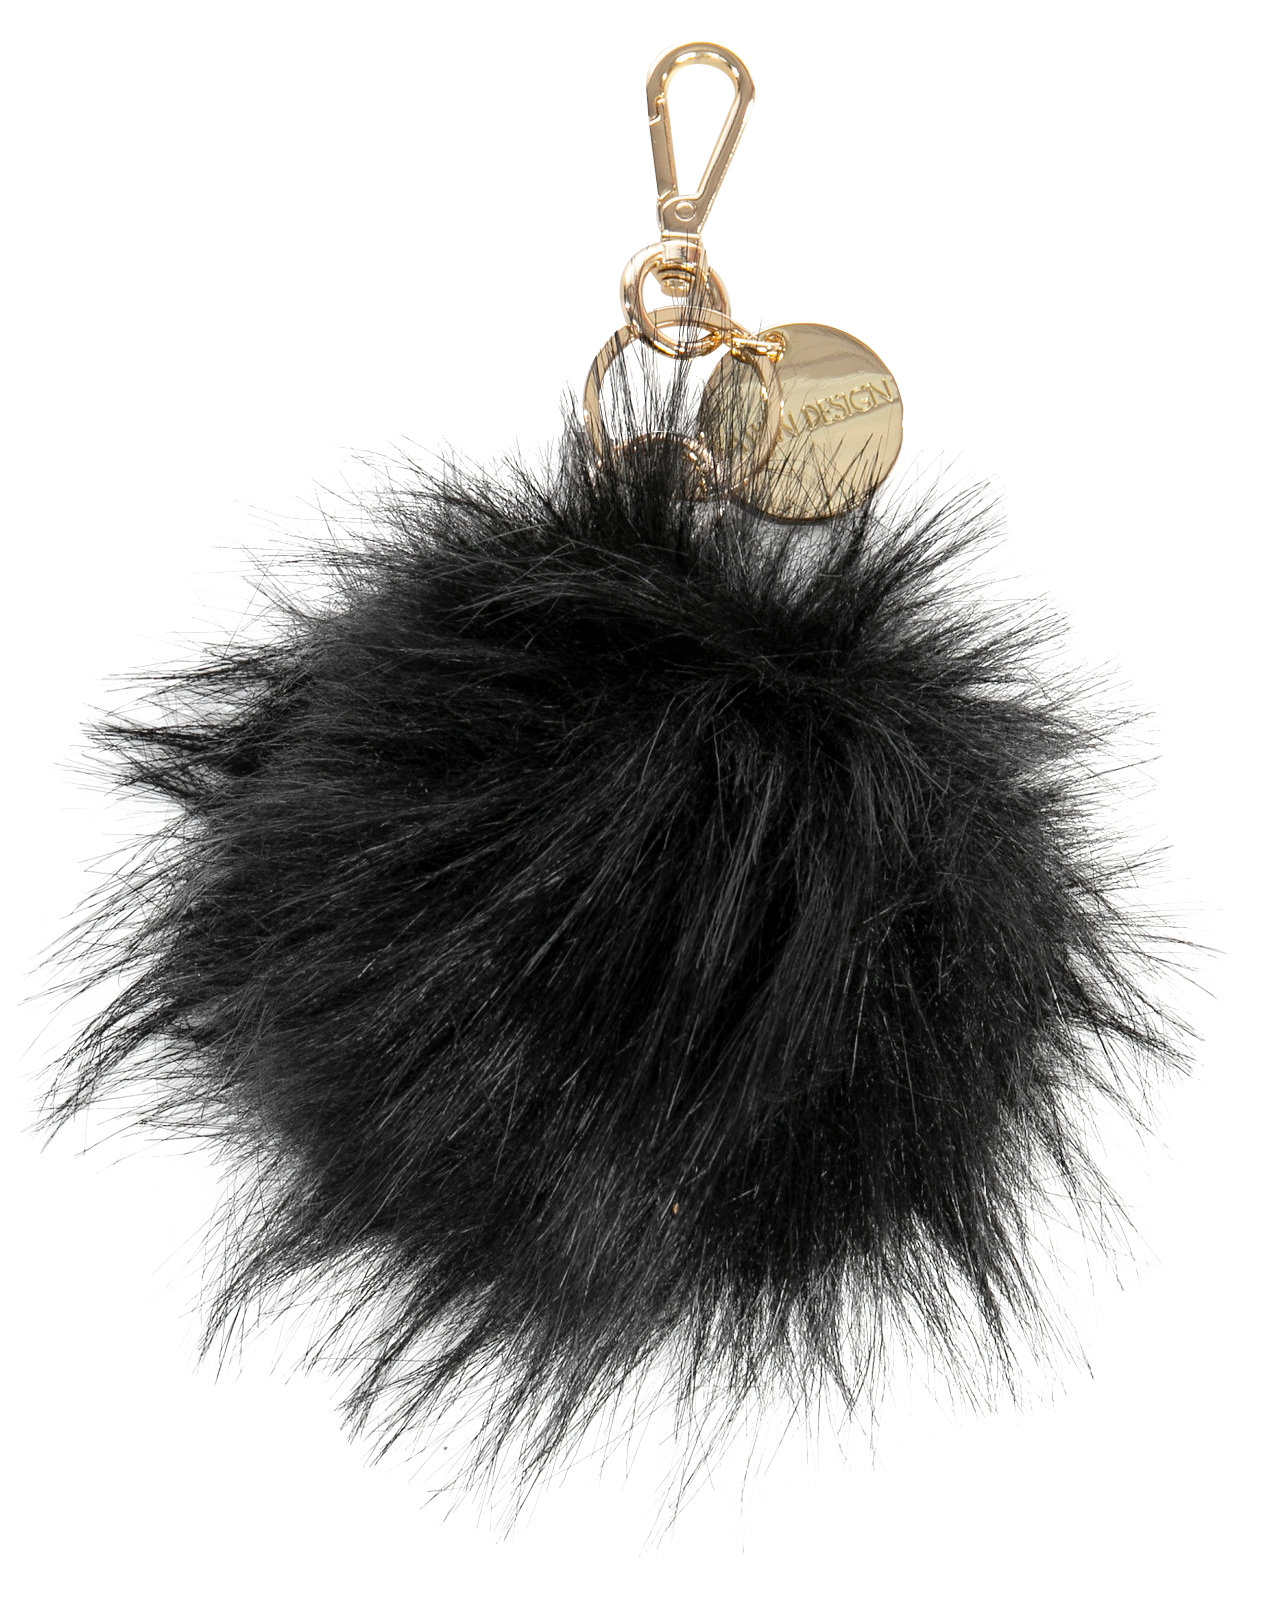 Fawn Design The Pouf Keychain